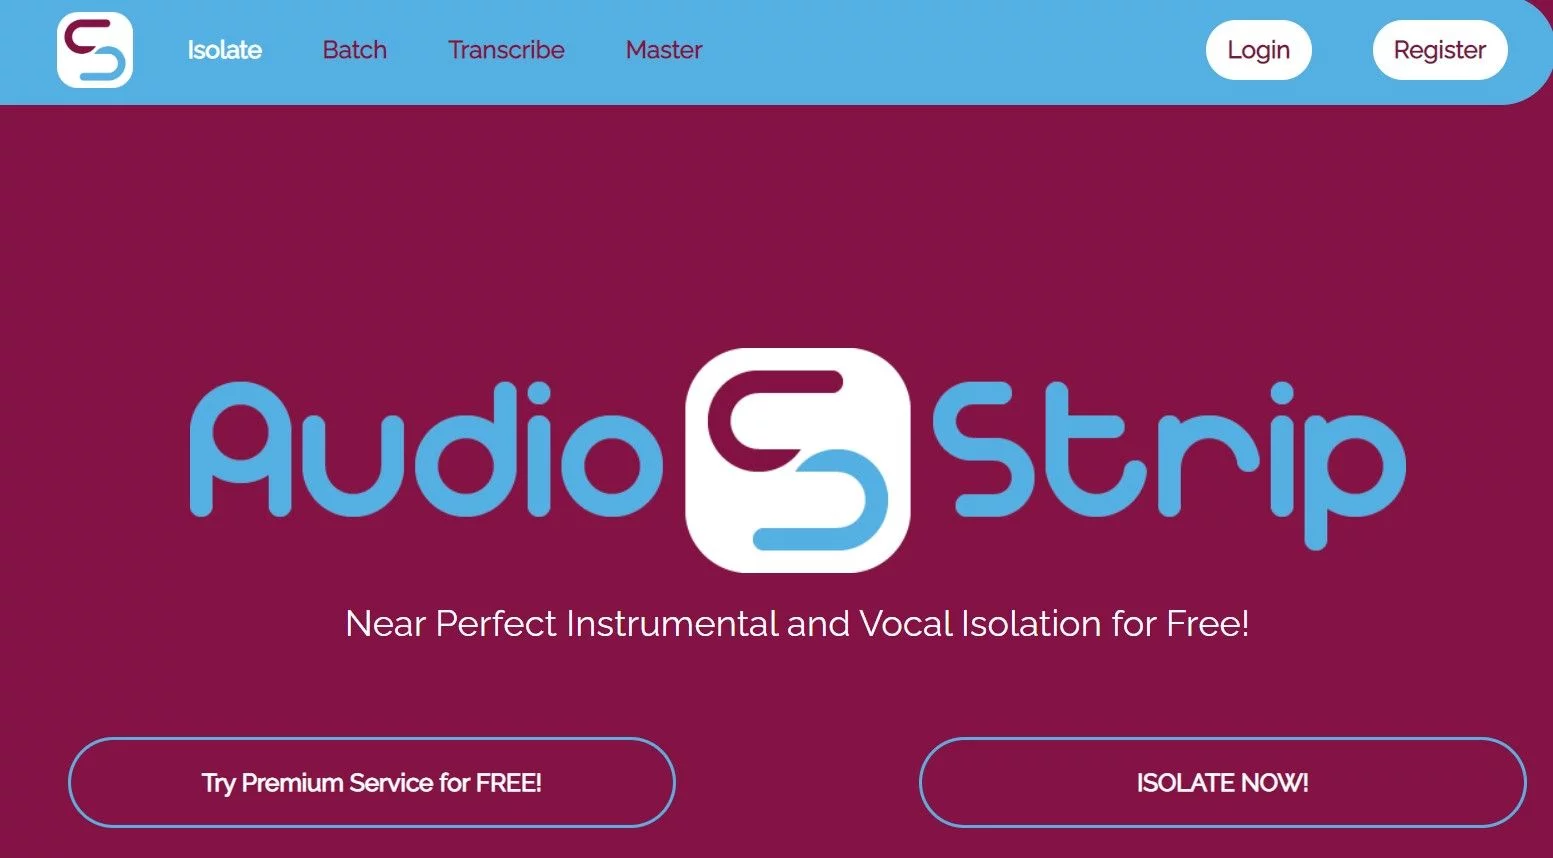  Isolate vocals/instruments for free!